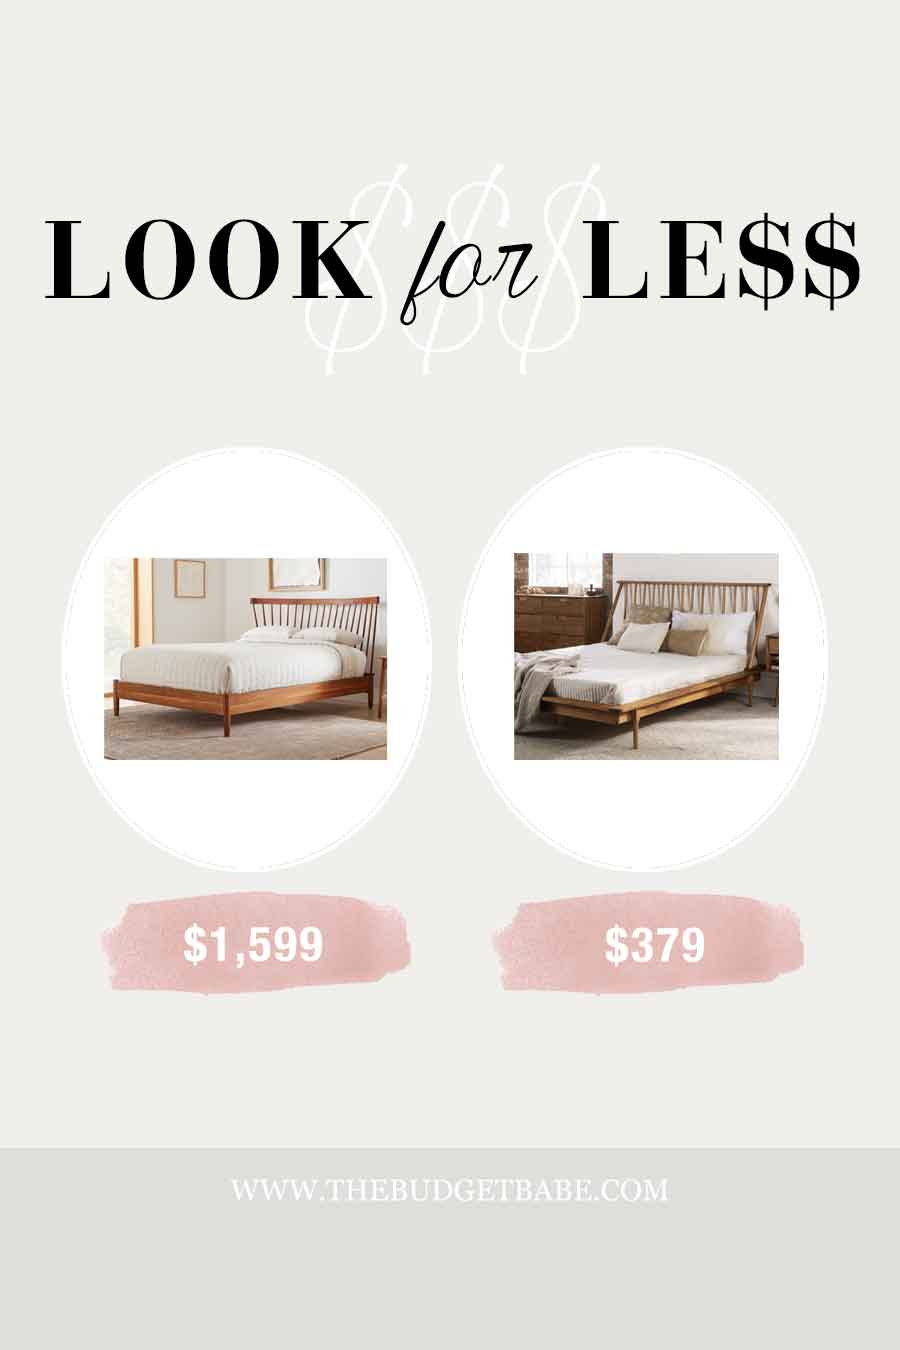 West Elm spindle bed look for less